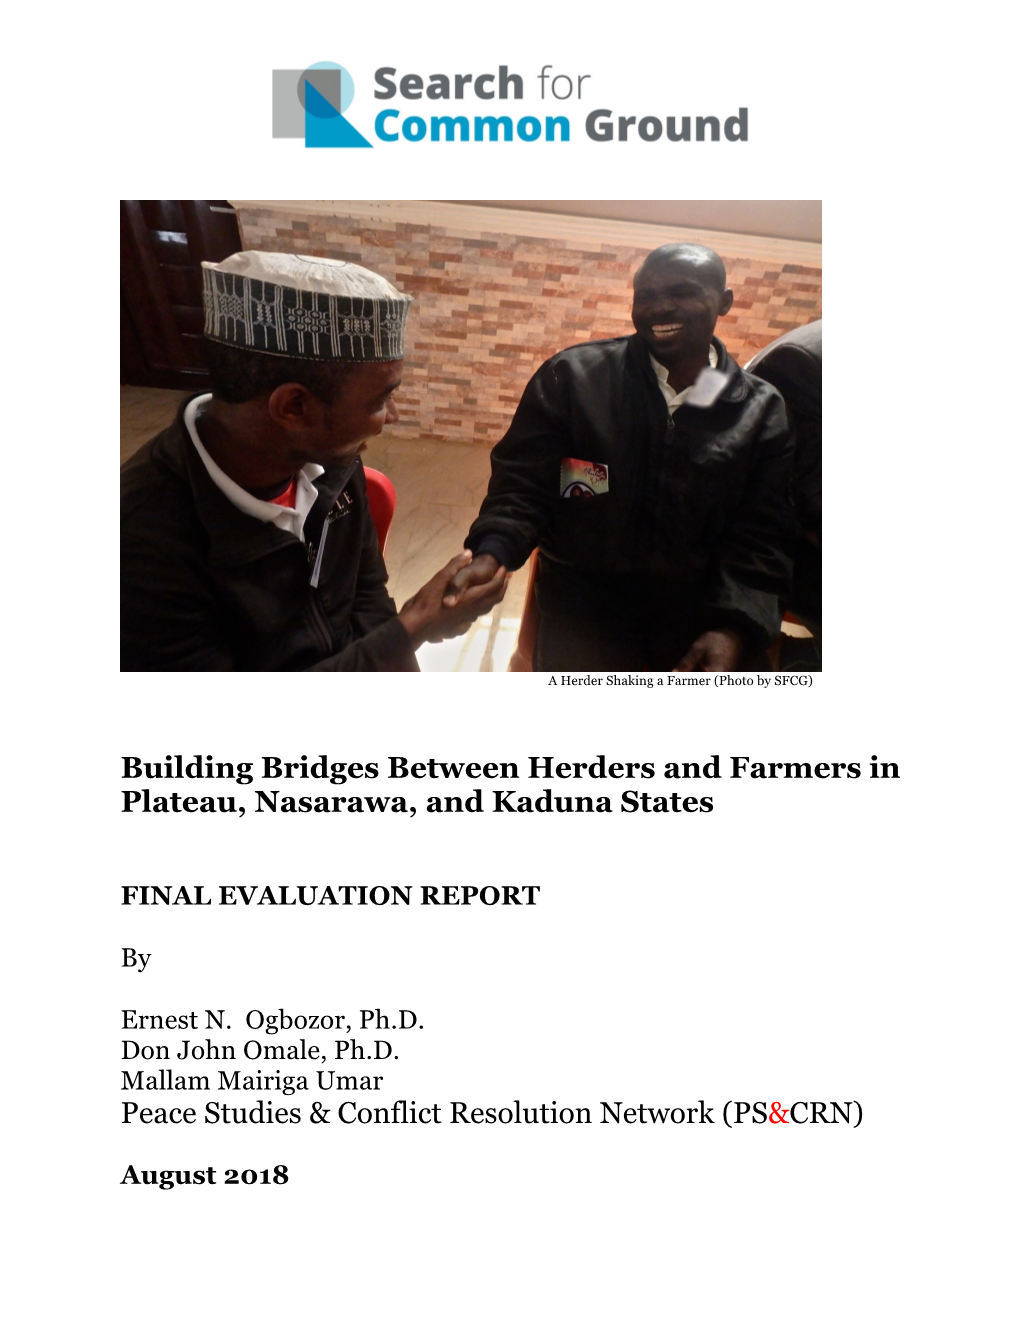 Building Bridges Between Herders and Farmers in Plateau, Nasarawa, and Kaduna States